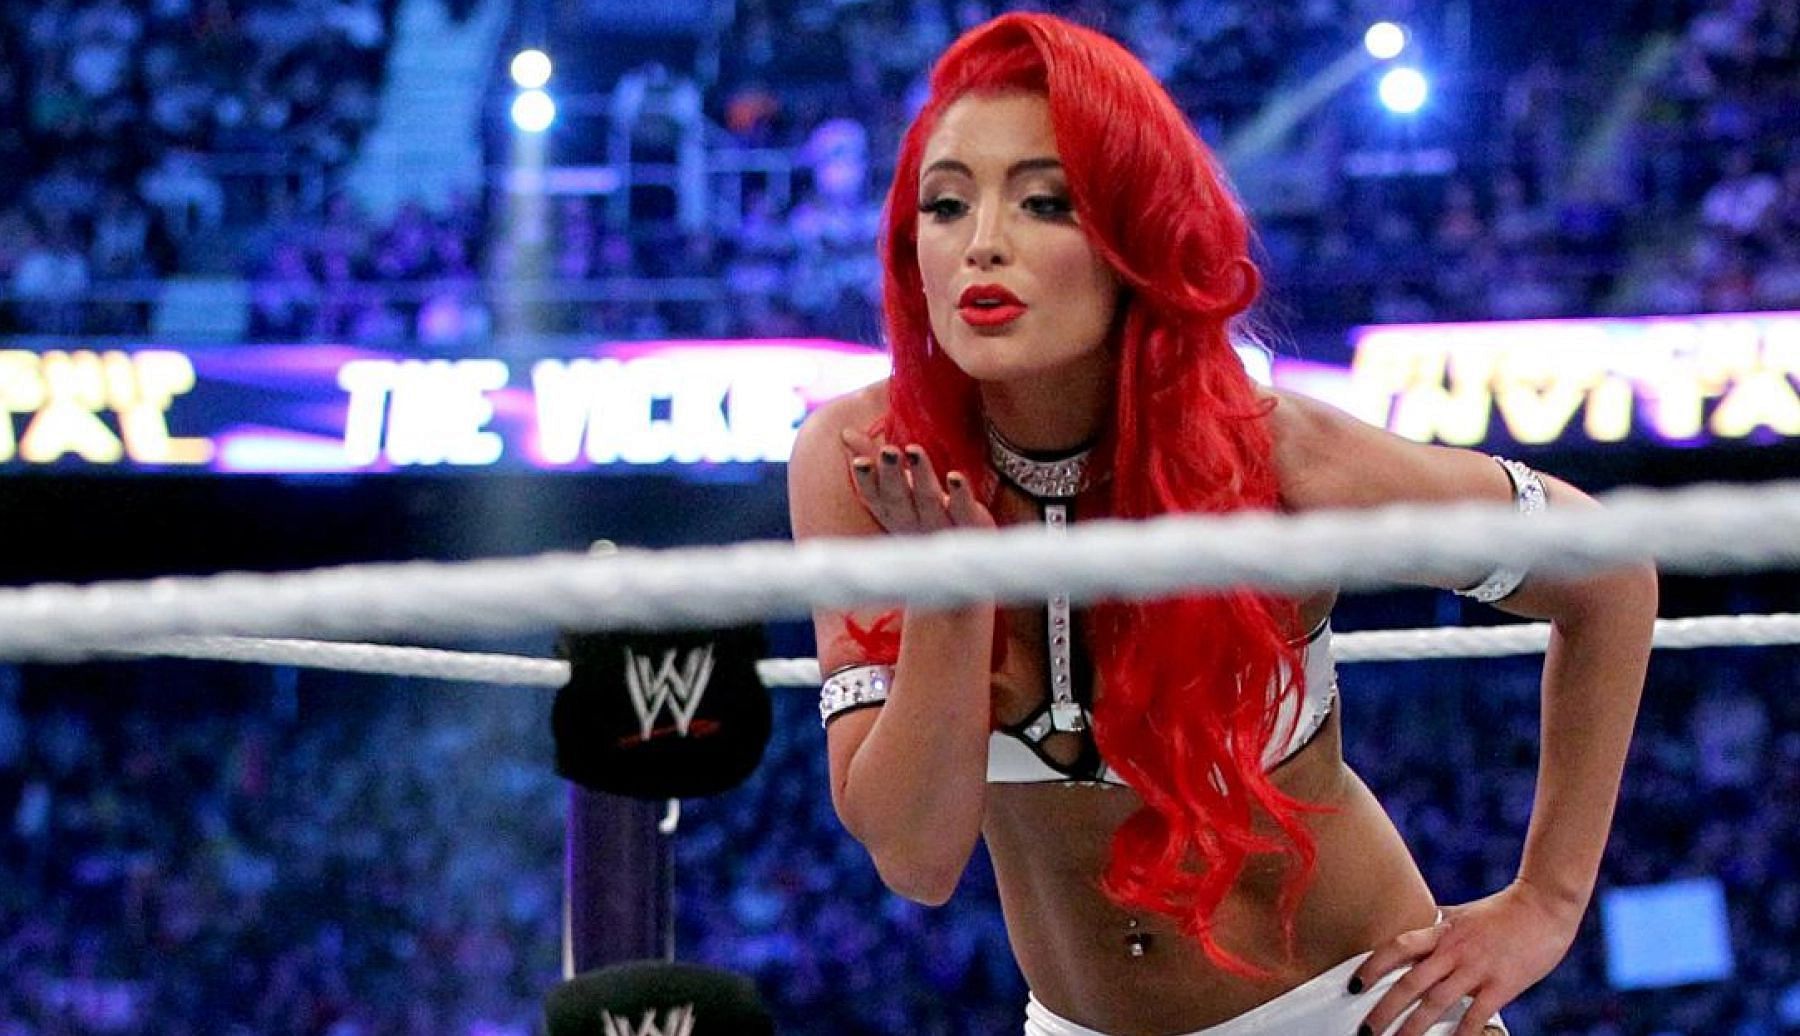 Eva Marie received a wholesome tweet from Doudrop after her WWE release